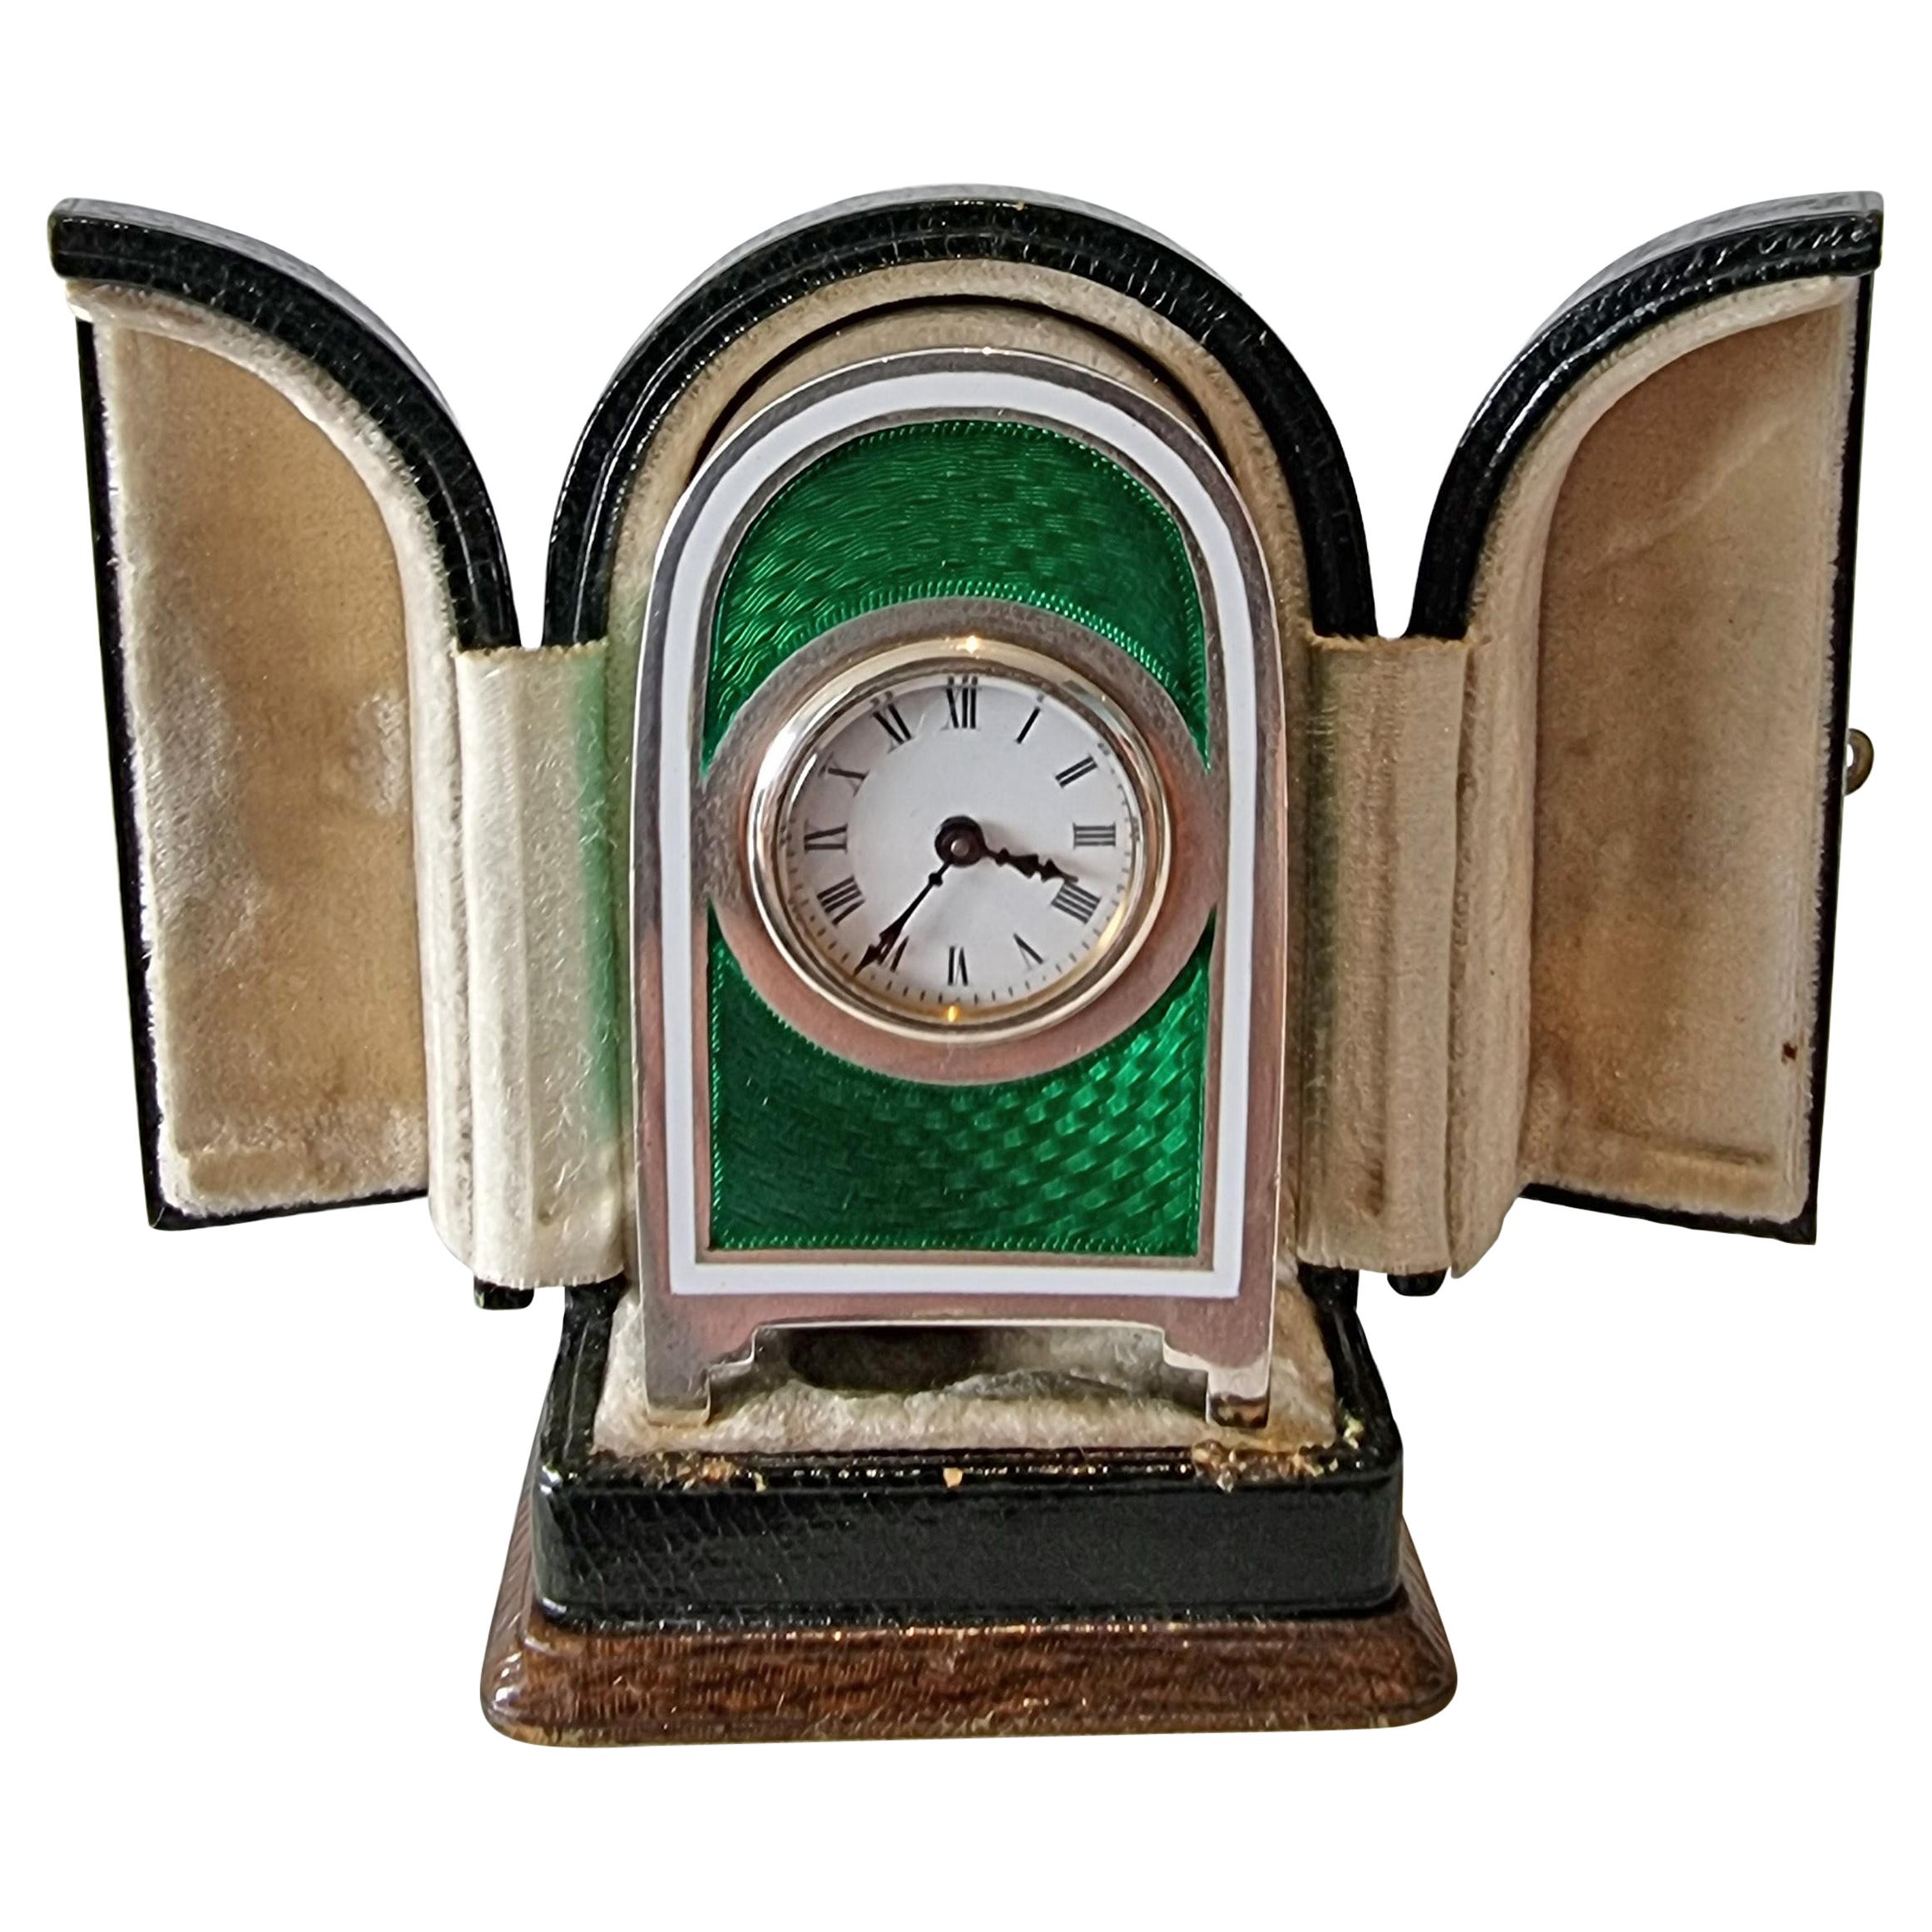 Miniature Silver and Guilloche Enamel Carriage or Travel Clock by Appay